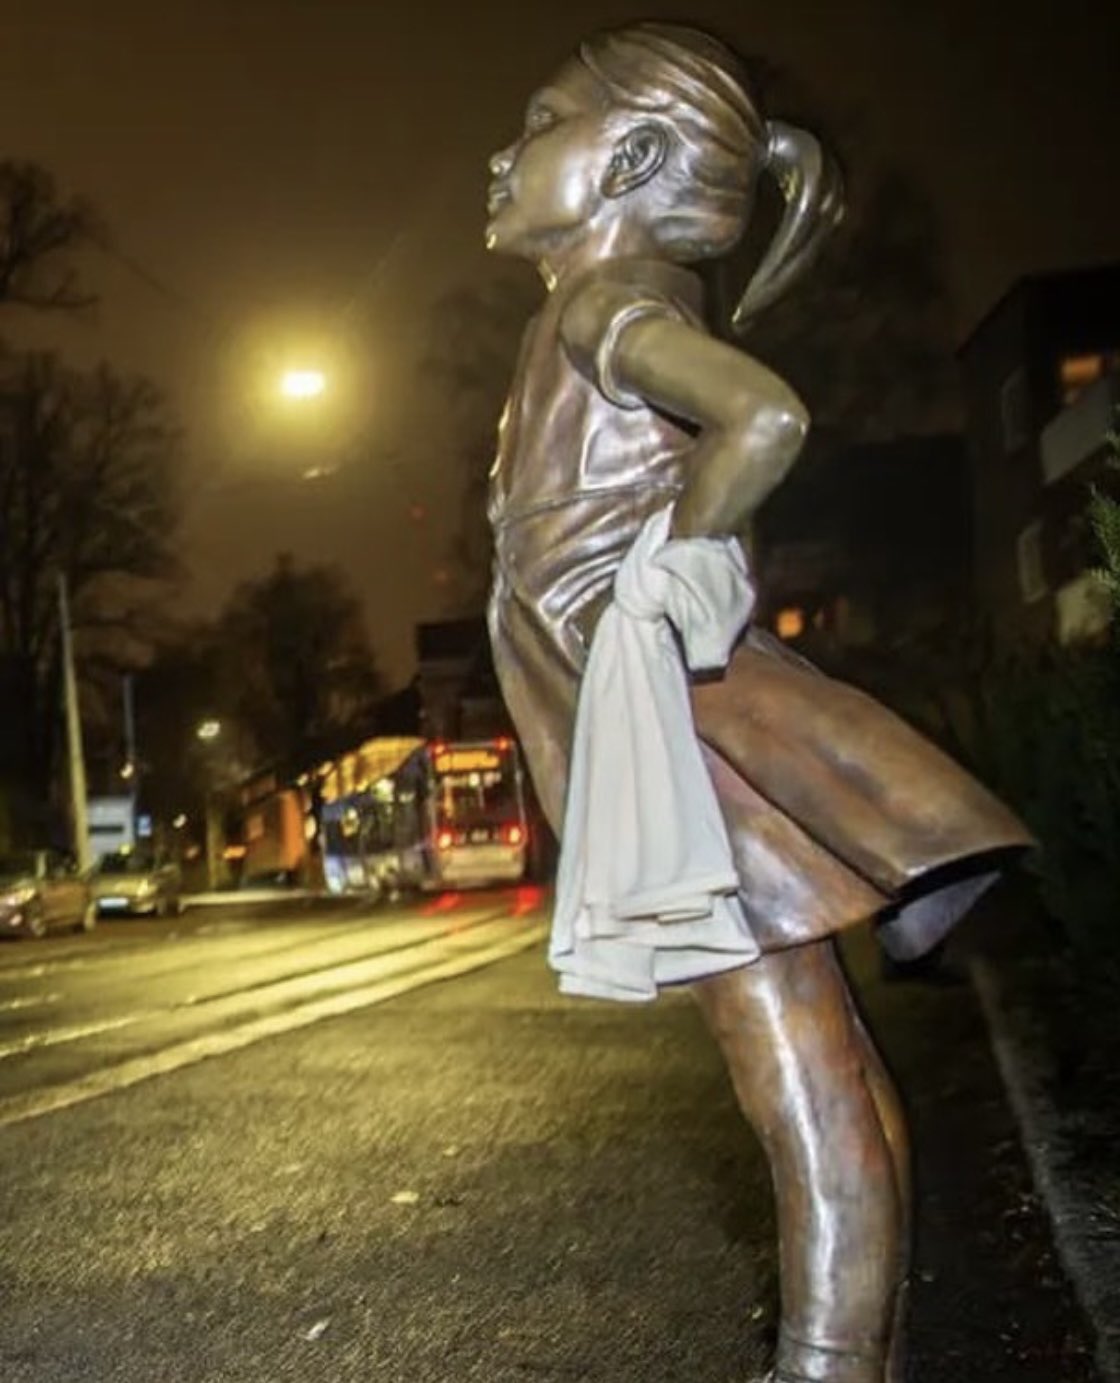 Photo of the fearless girl statue on the street in the dark. A white piece of fabric is wrapped around her wrist as she looks up defiantly.